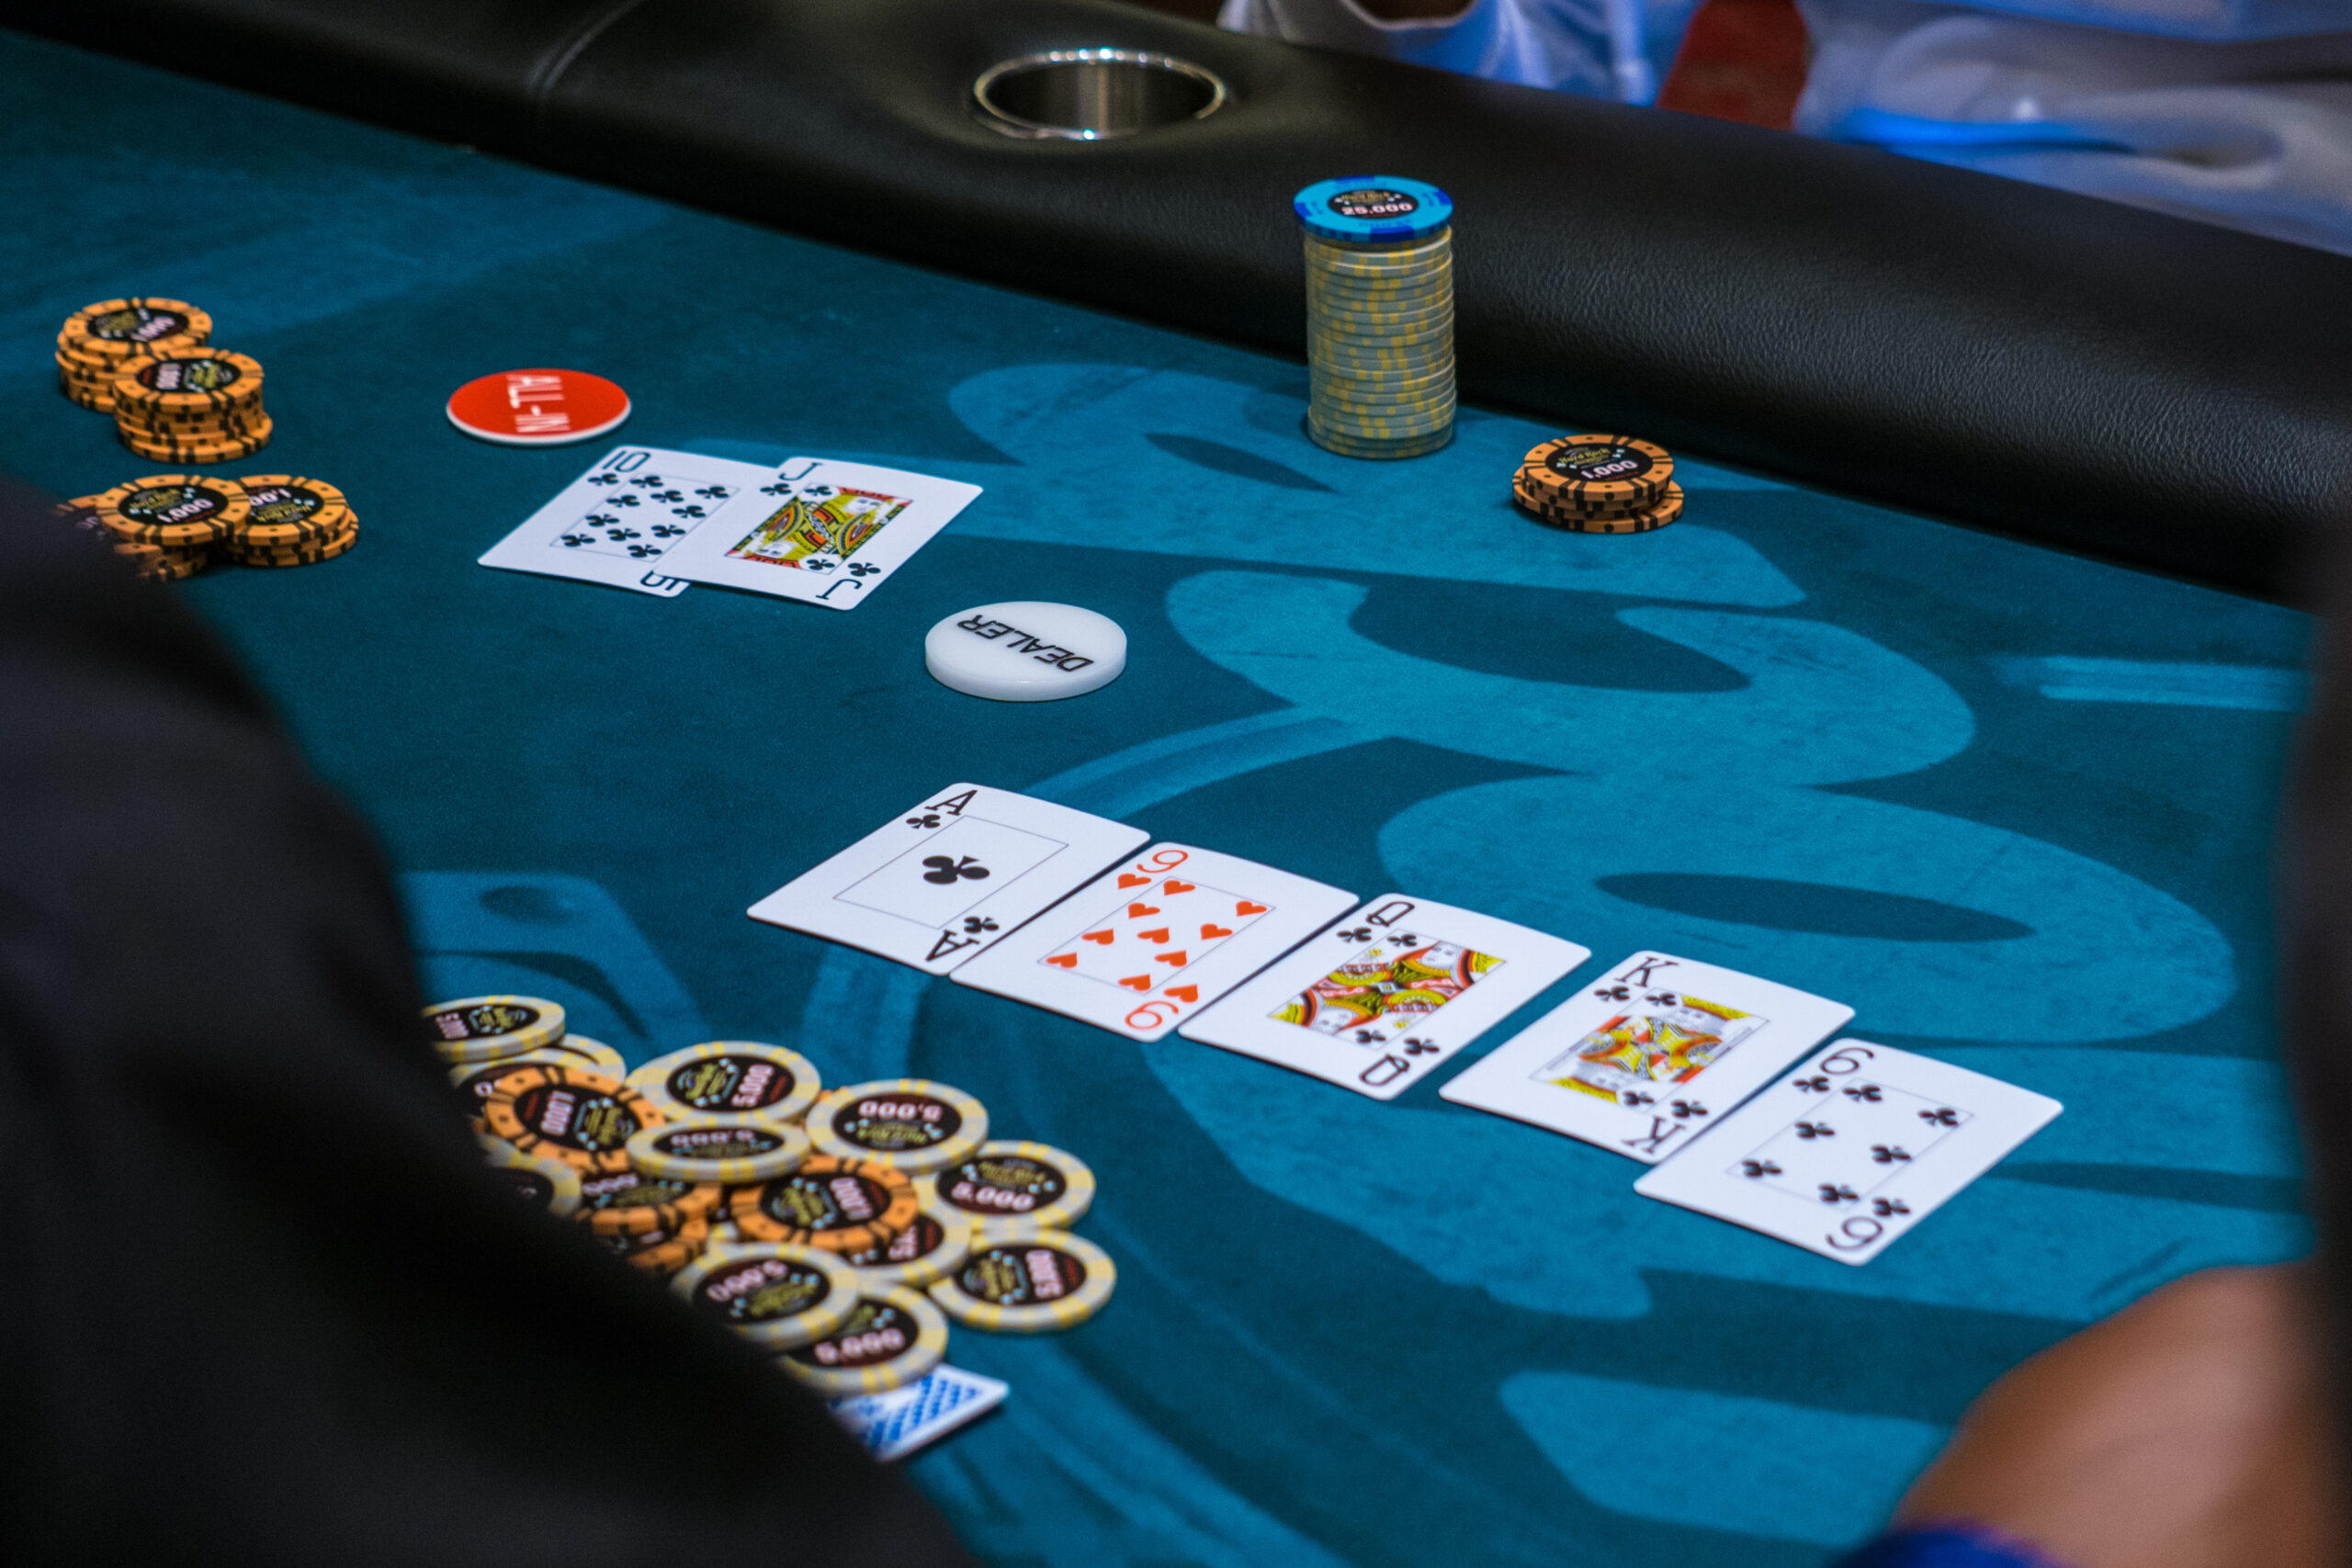 A board shows Ac-Qc-9h-Kc-6c, and a player's cards are revealed as Jc-10c for a Royal Flush in clubs.